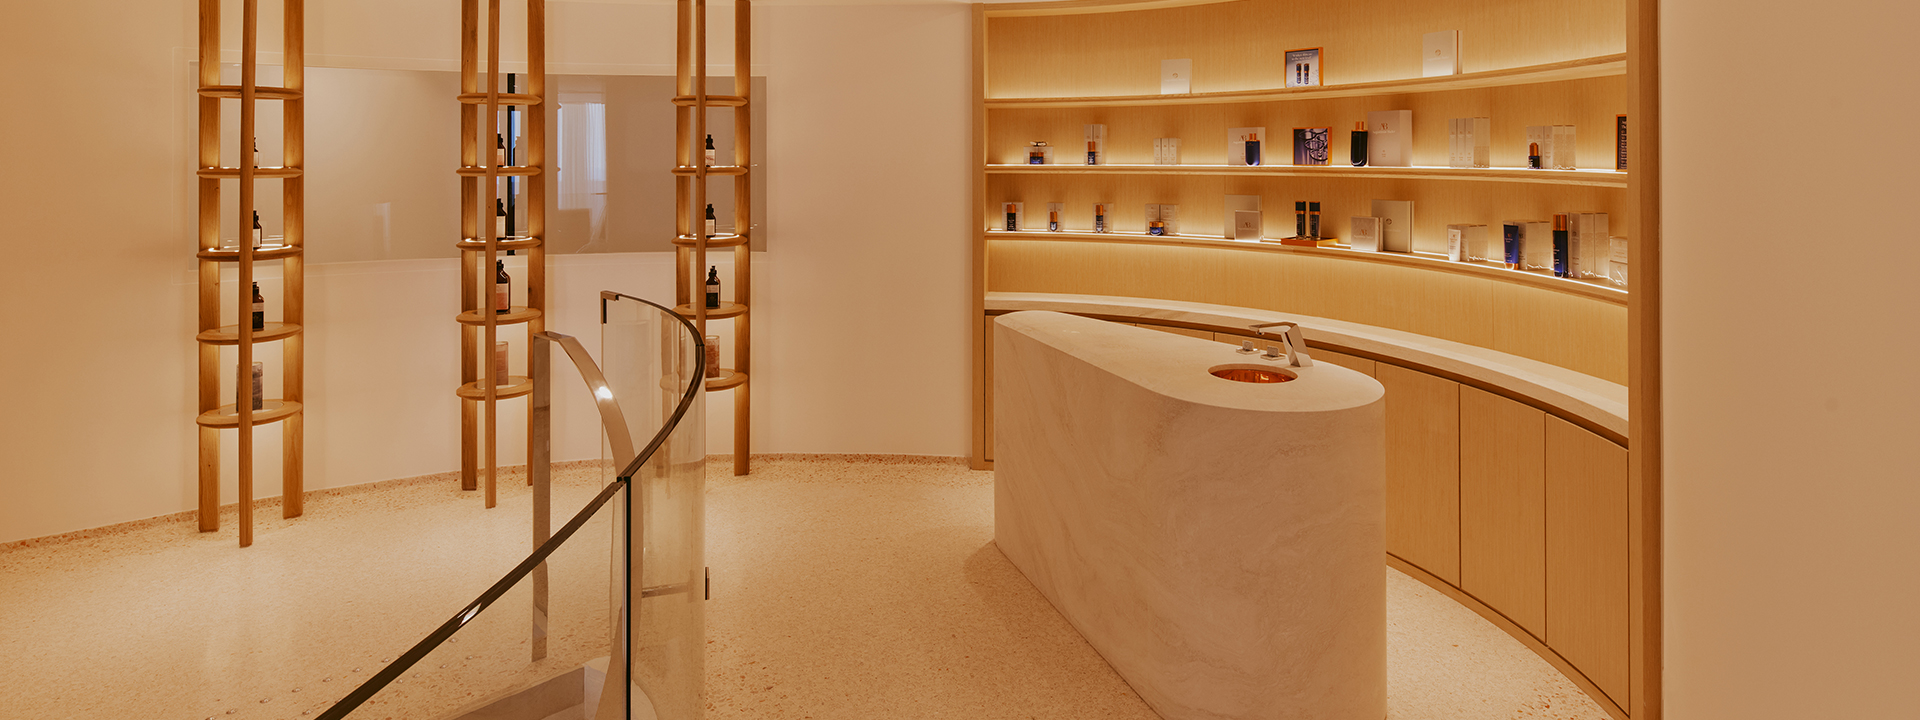 The Maybourne Riviera Spa Entrance Counter with product on shelves one each side of the counter